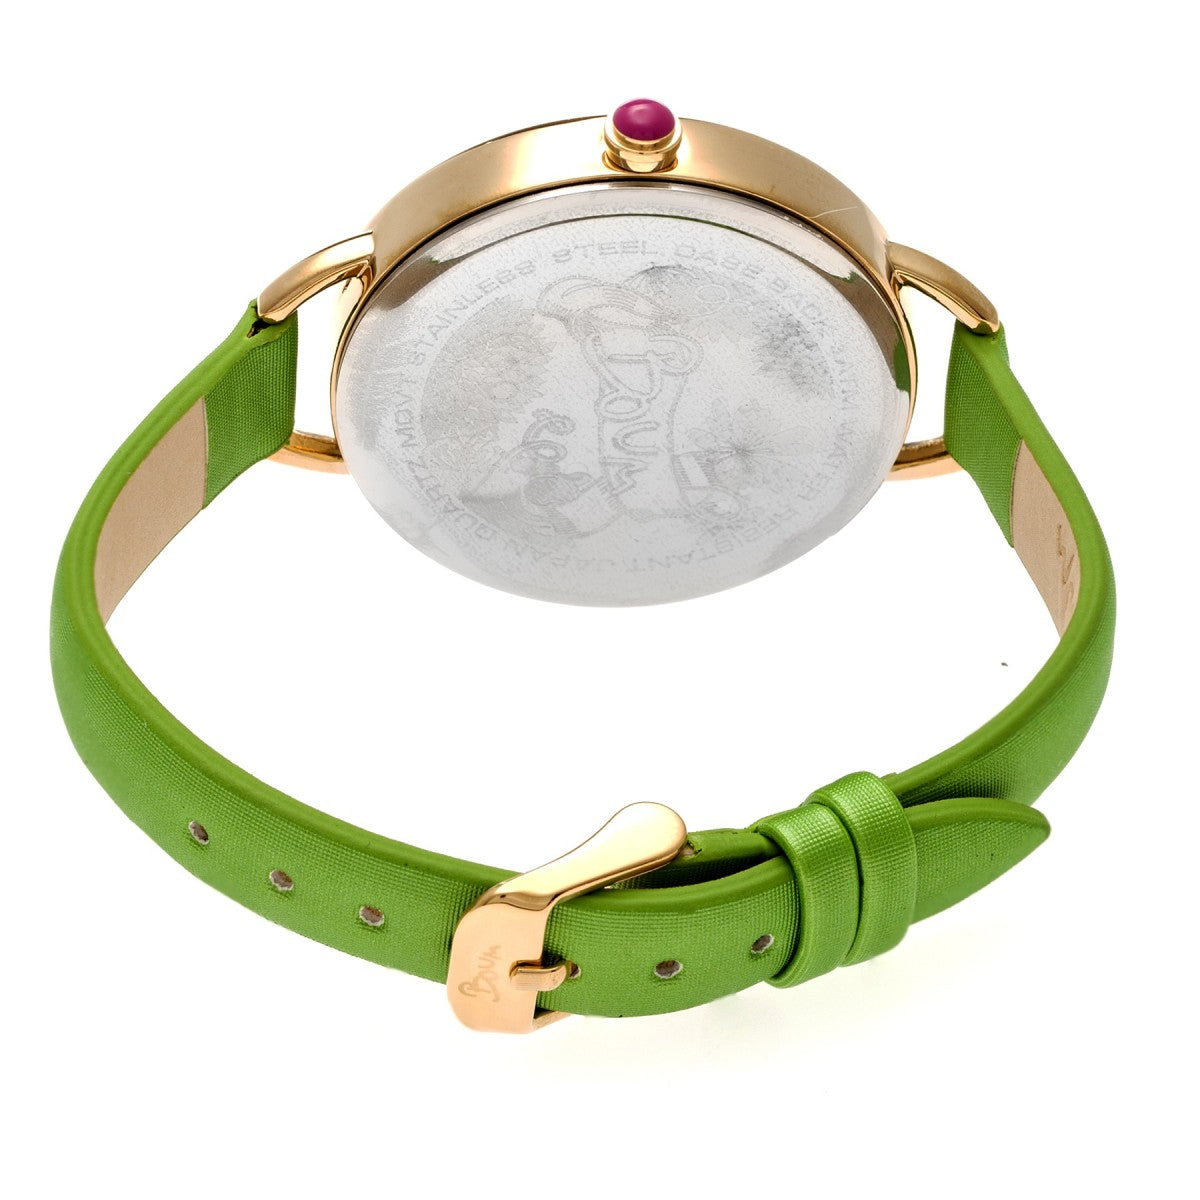 Boum Cirque Sunray Dial Leather-Band Watch - Gold/Green - BOUBM4404